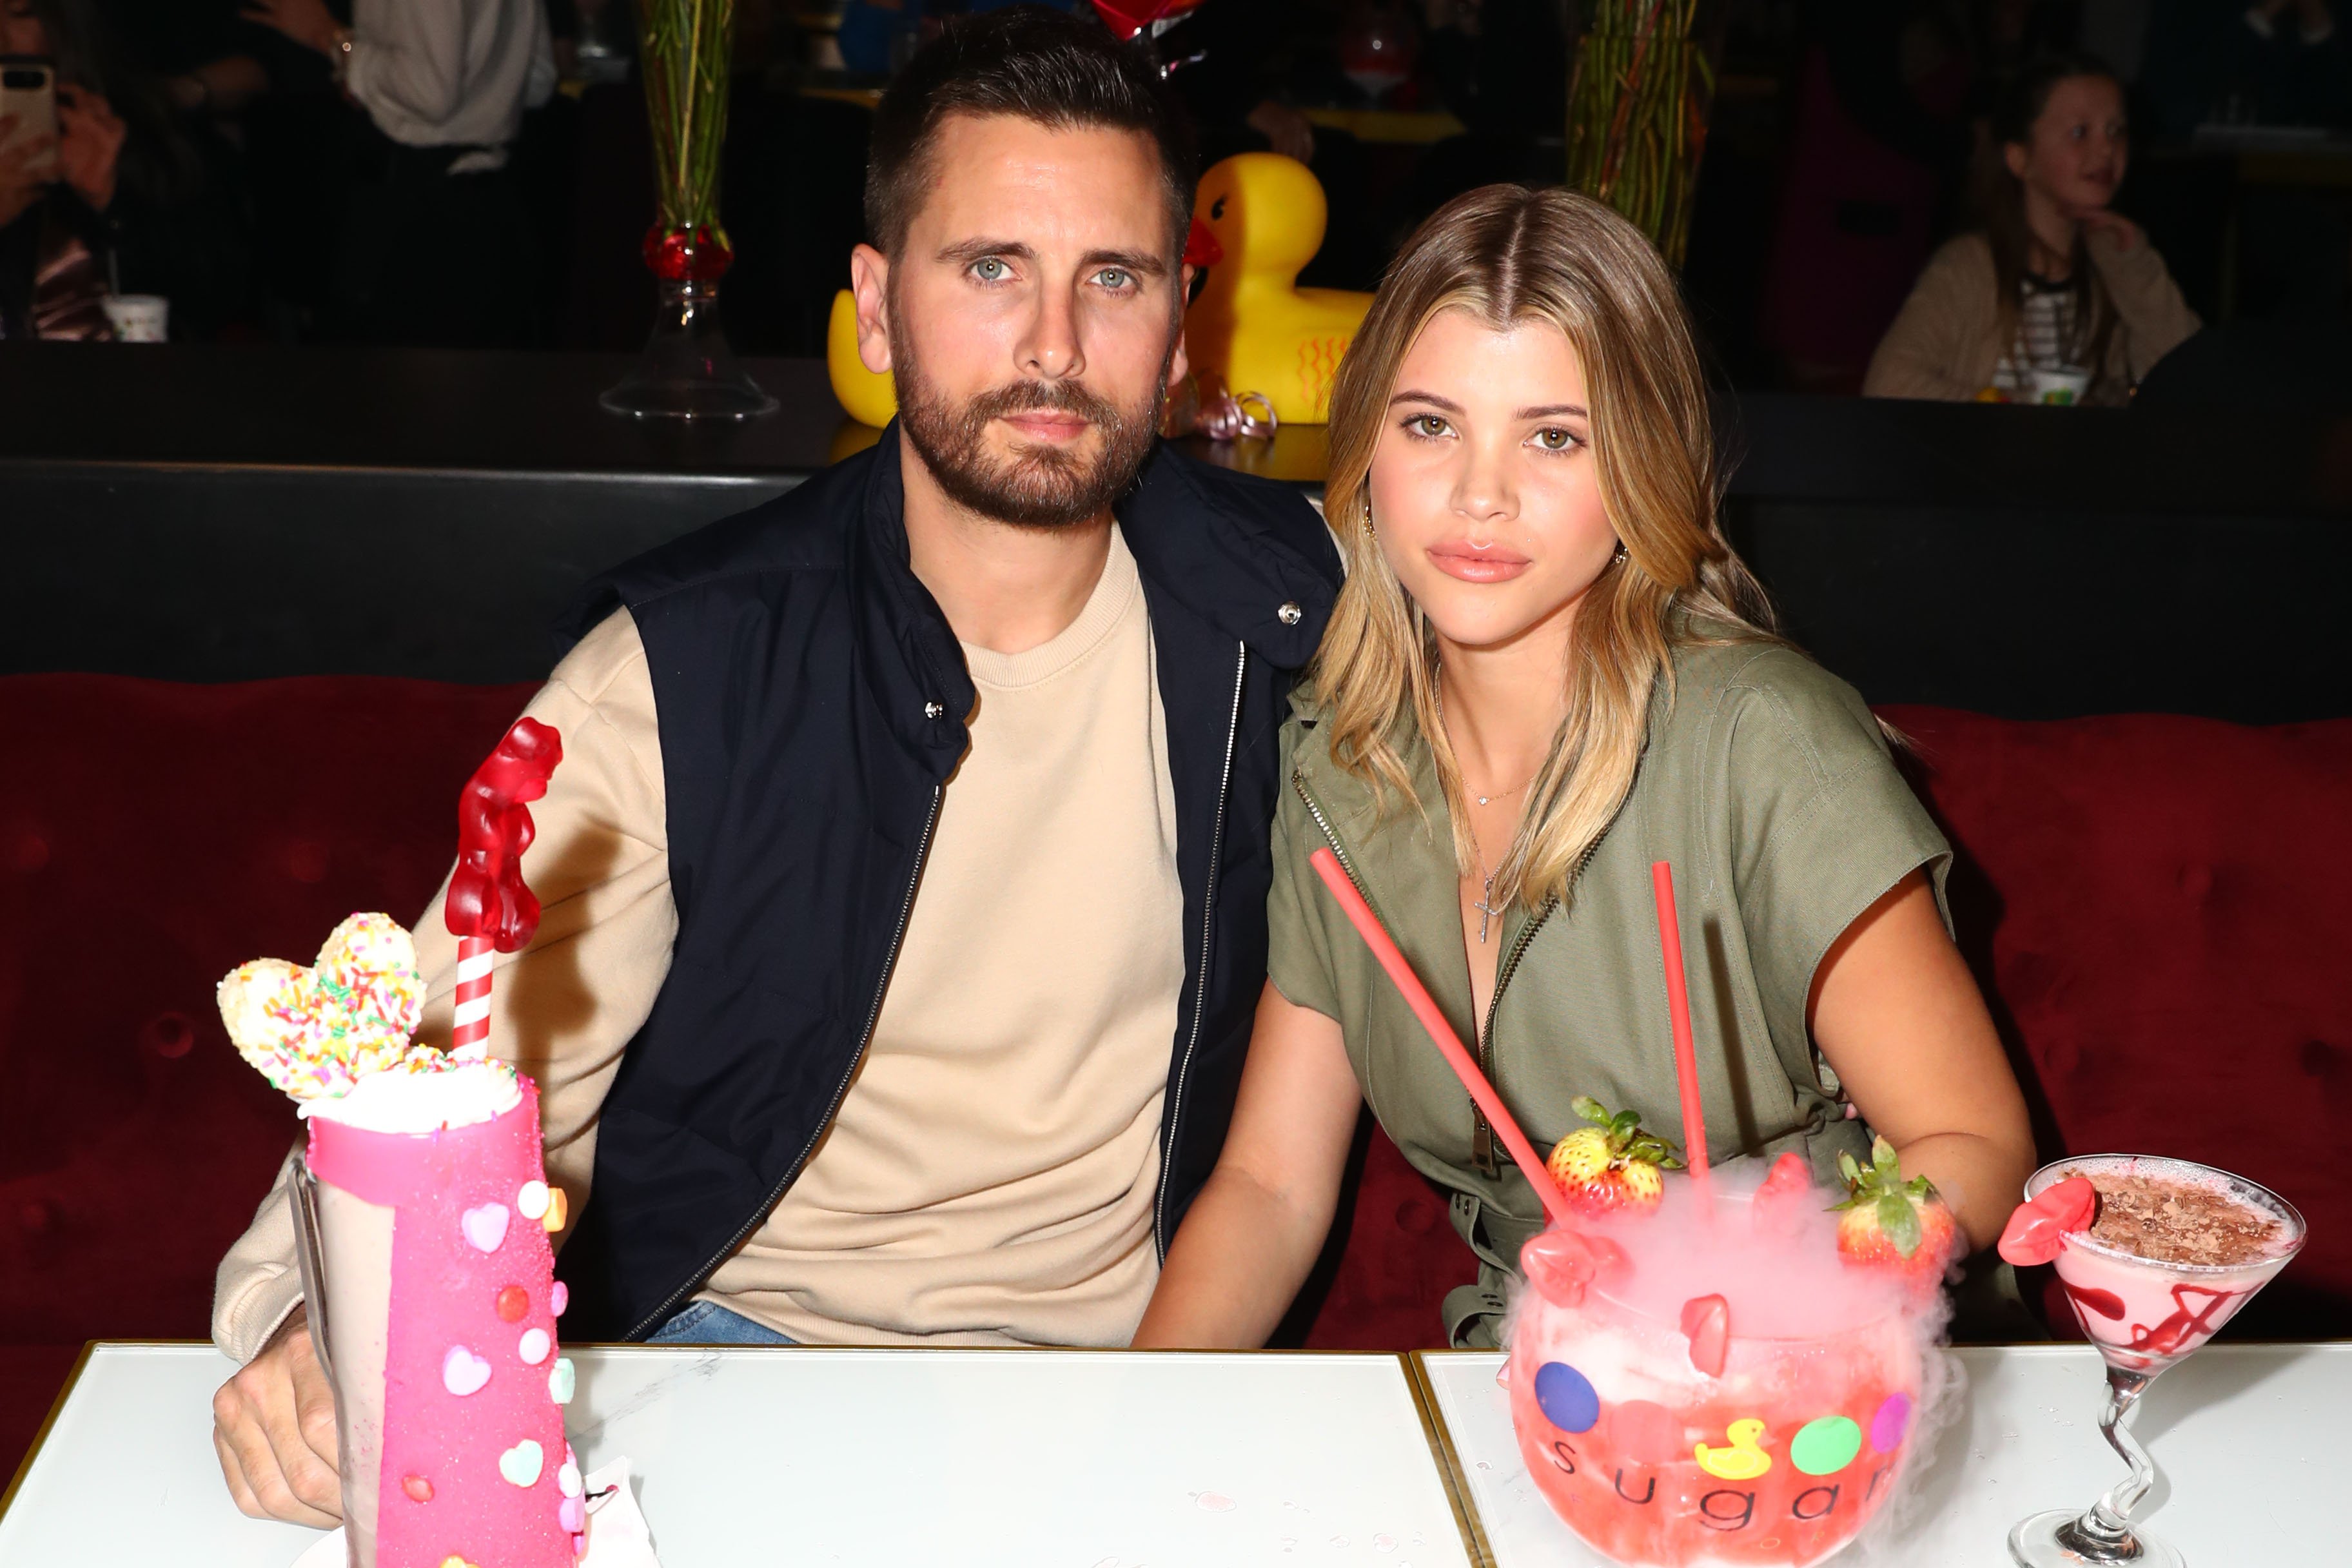 Scott Disick and Sofia Richie celebrate Valentine's Day at San Diego's new Theater Box® Entertainment Complex with dinner at Sugar Factory American Brasserie at Theater Box® on February 14, 2019 in San Diego, California | Source: Getty Images